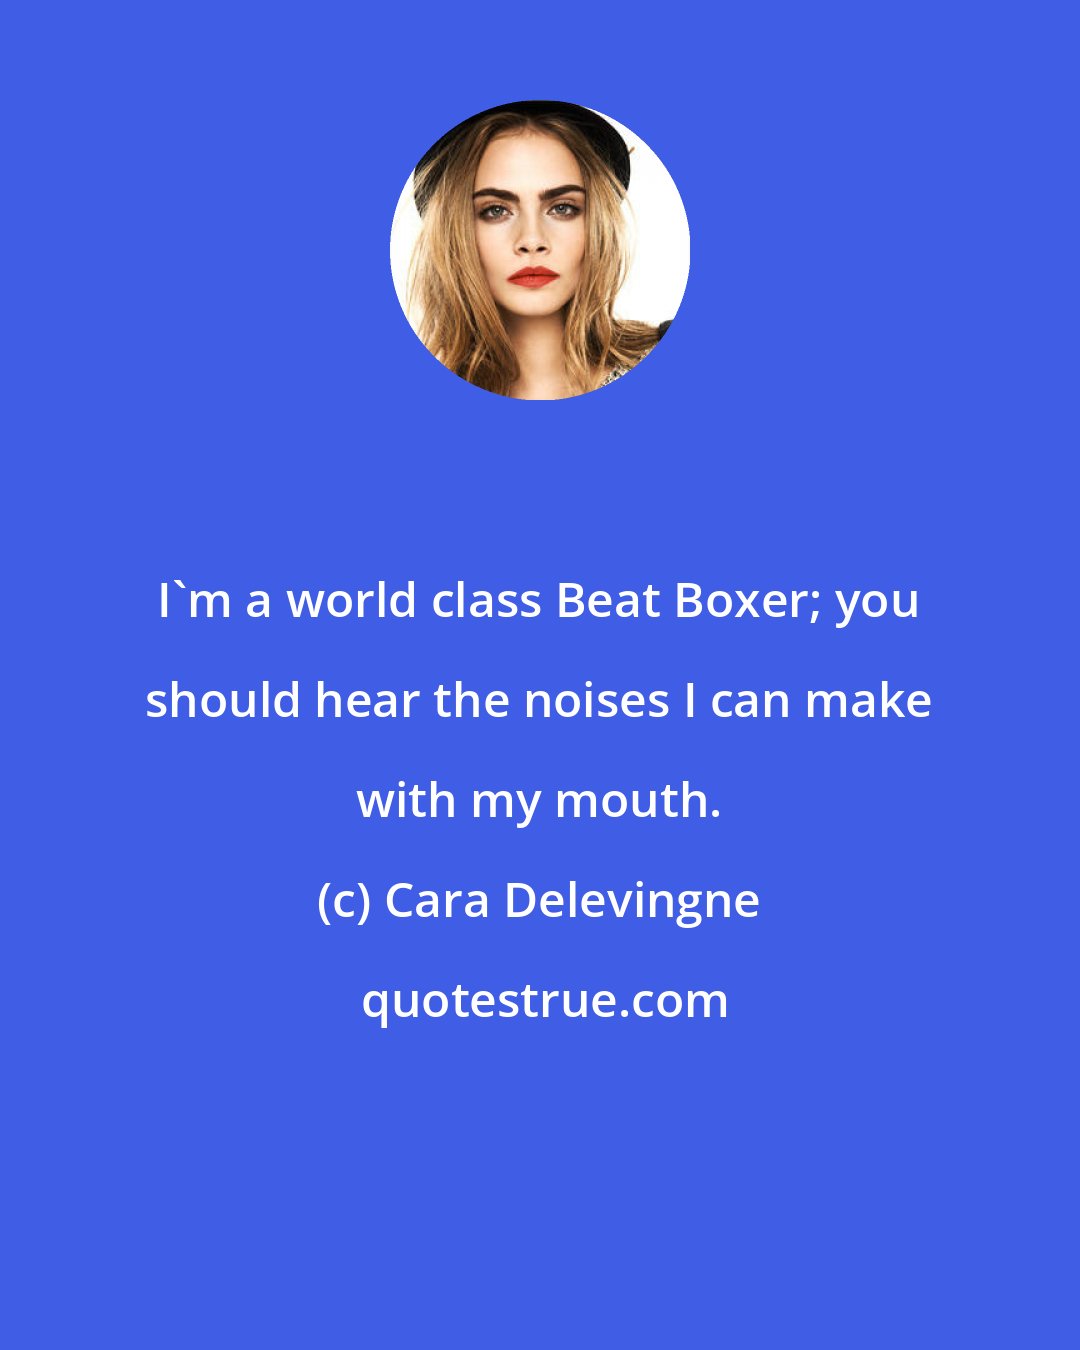 Cara Delevingne: I'm a world class Beat Boxer; you should hear the noises I can make with my mouth.